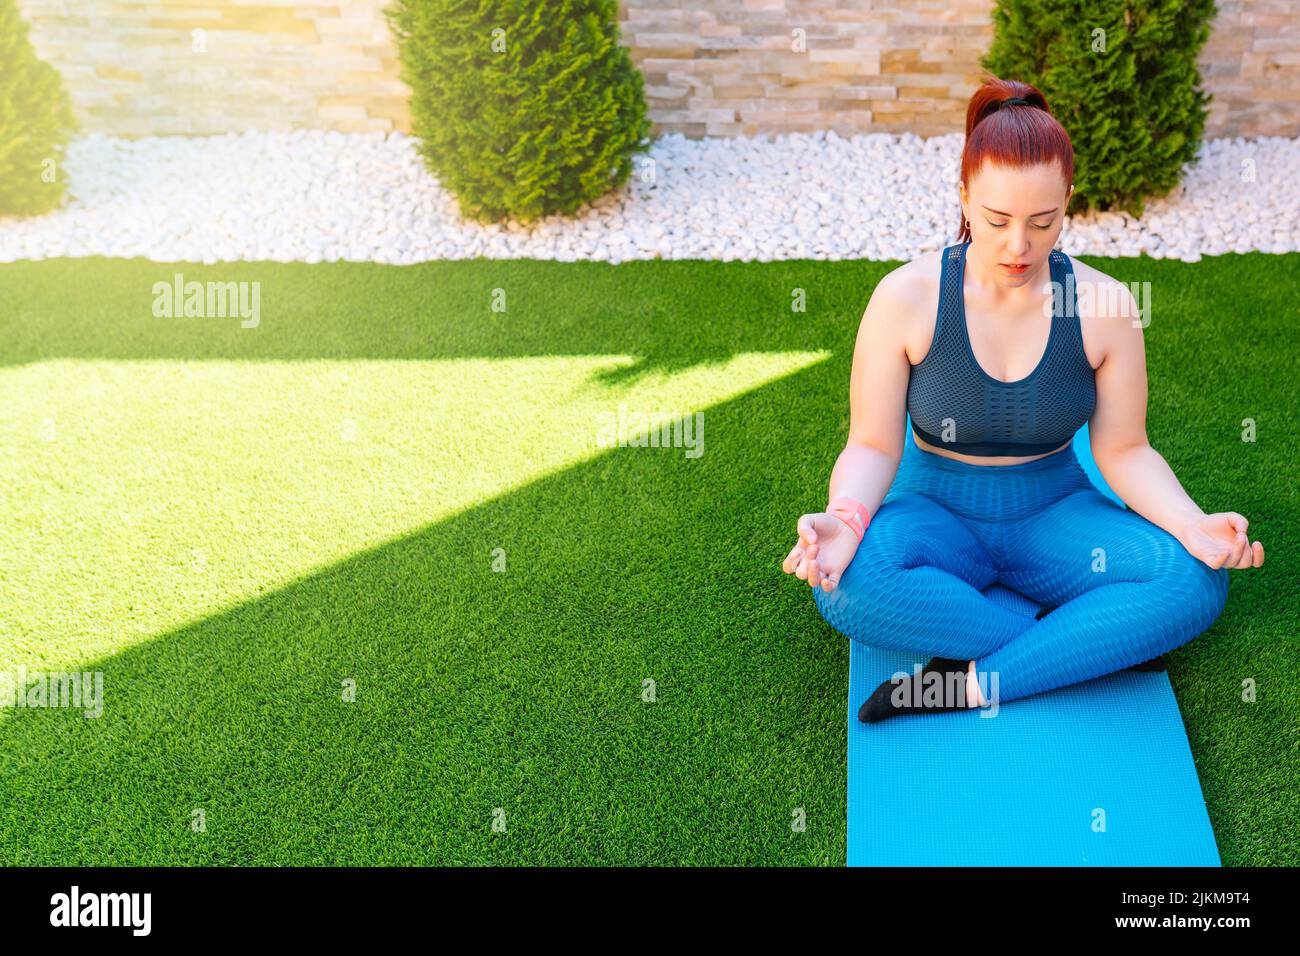 woman practicing meditation in the open air, relaxation exercises, doing the lotus posture. copy space. concept of health and well-being. Stock Photo